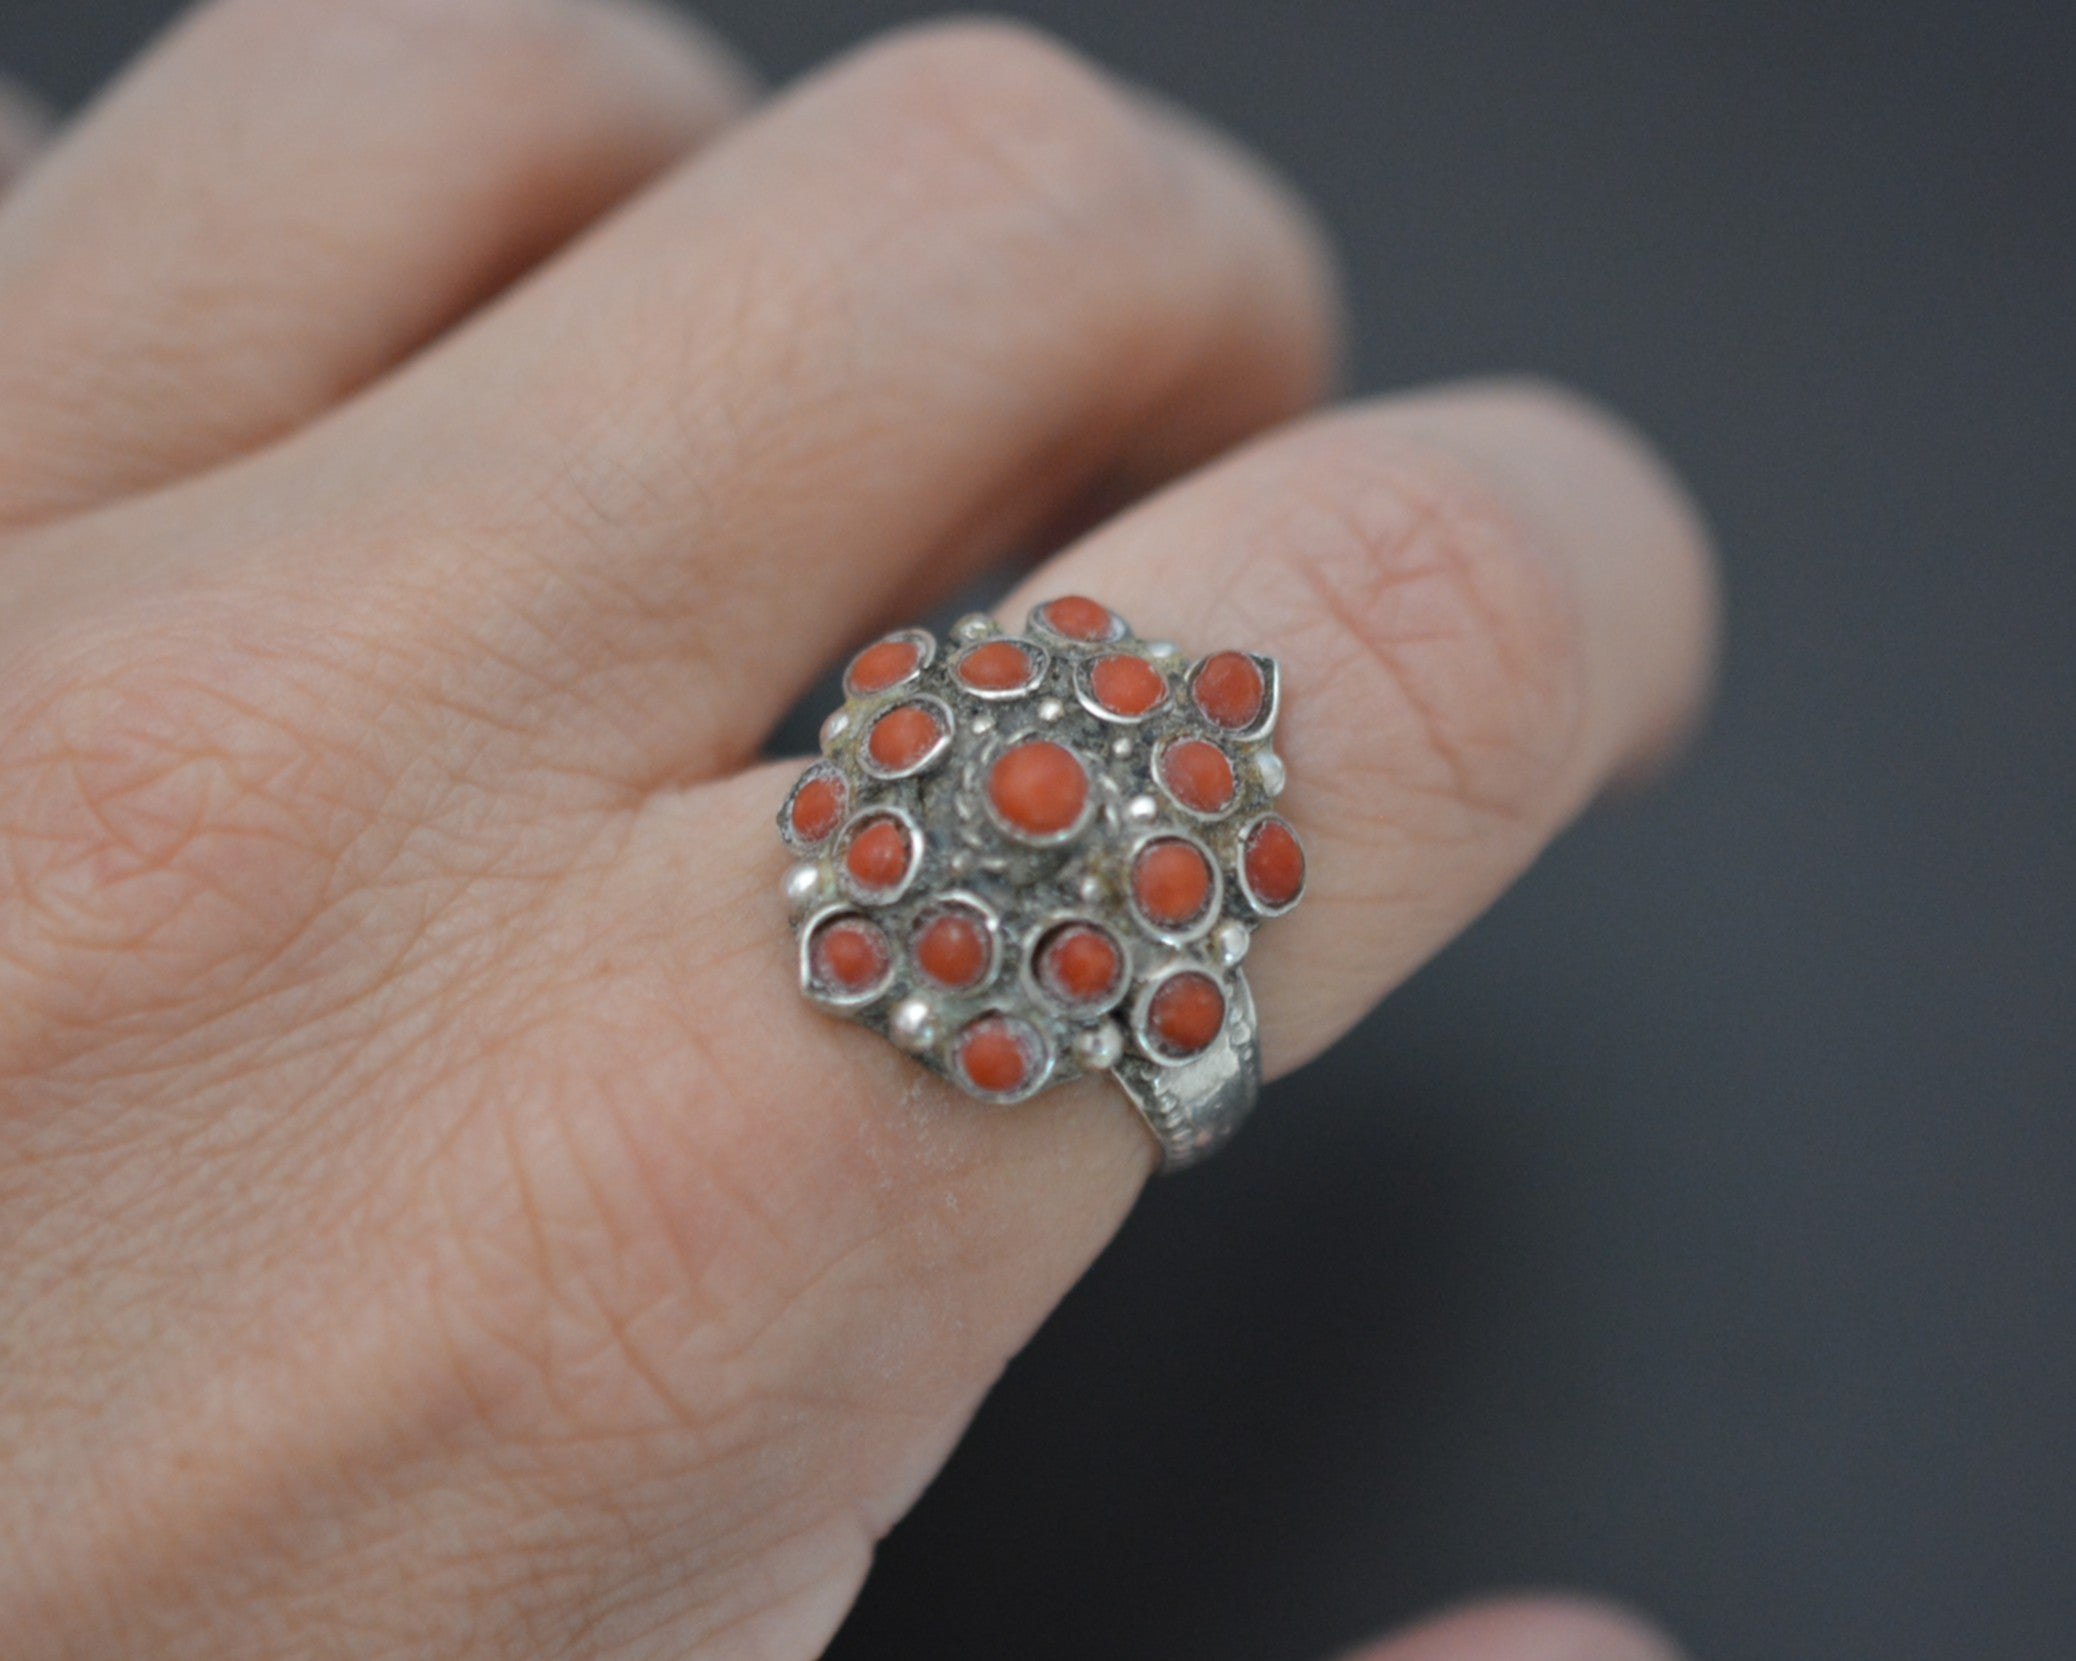 Nepali Coral Ring - Size 6